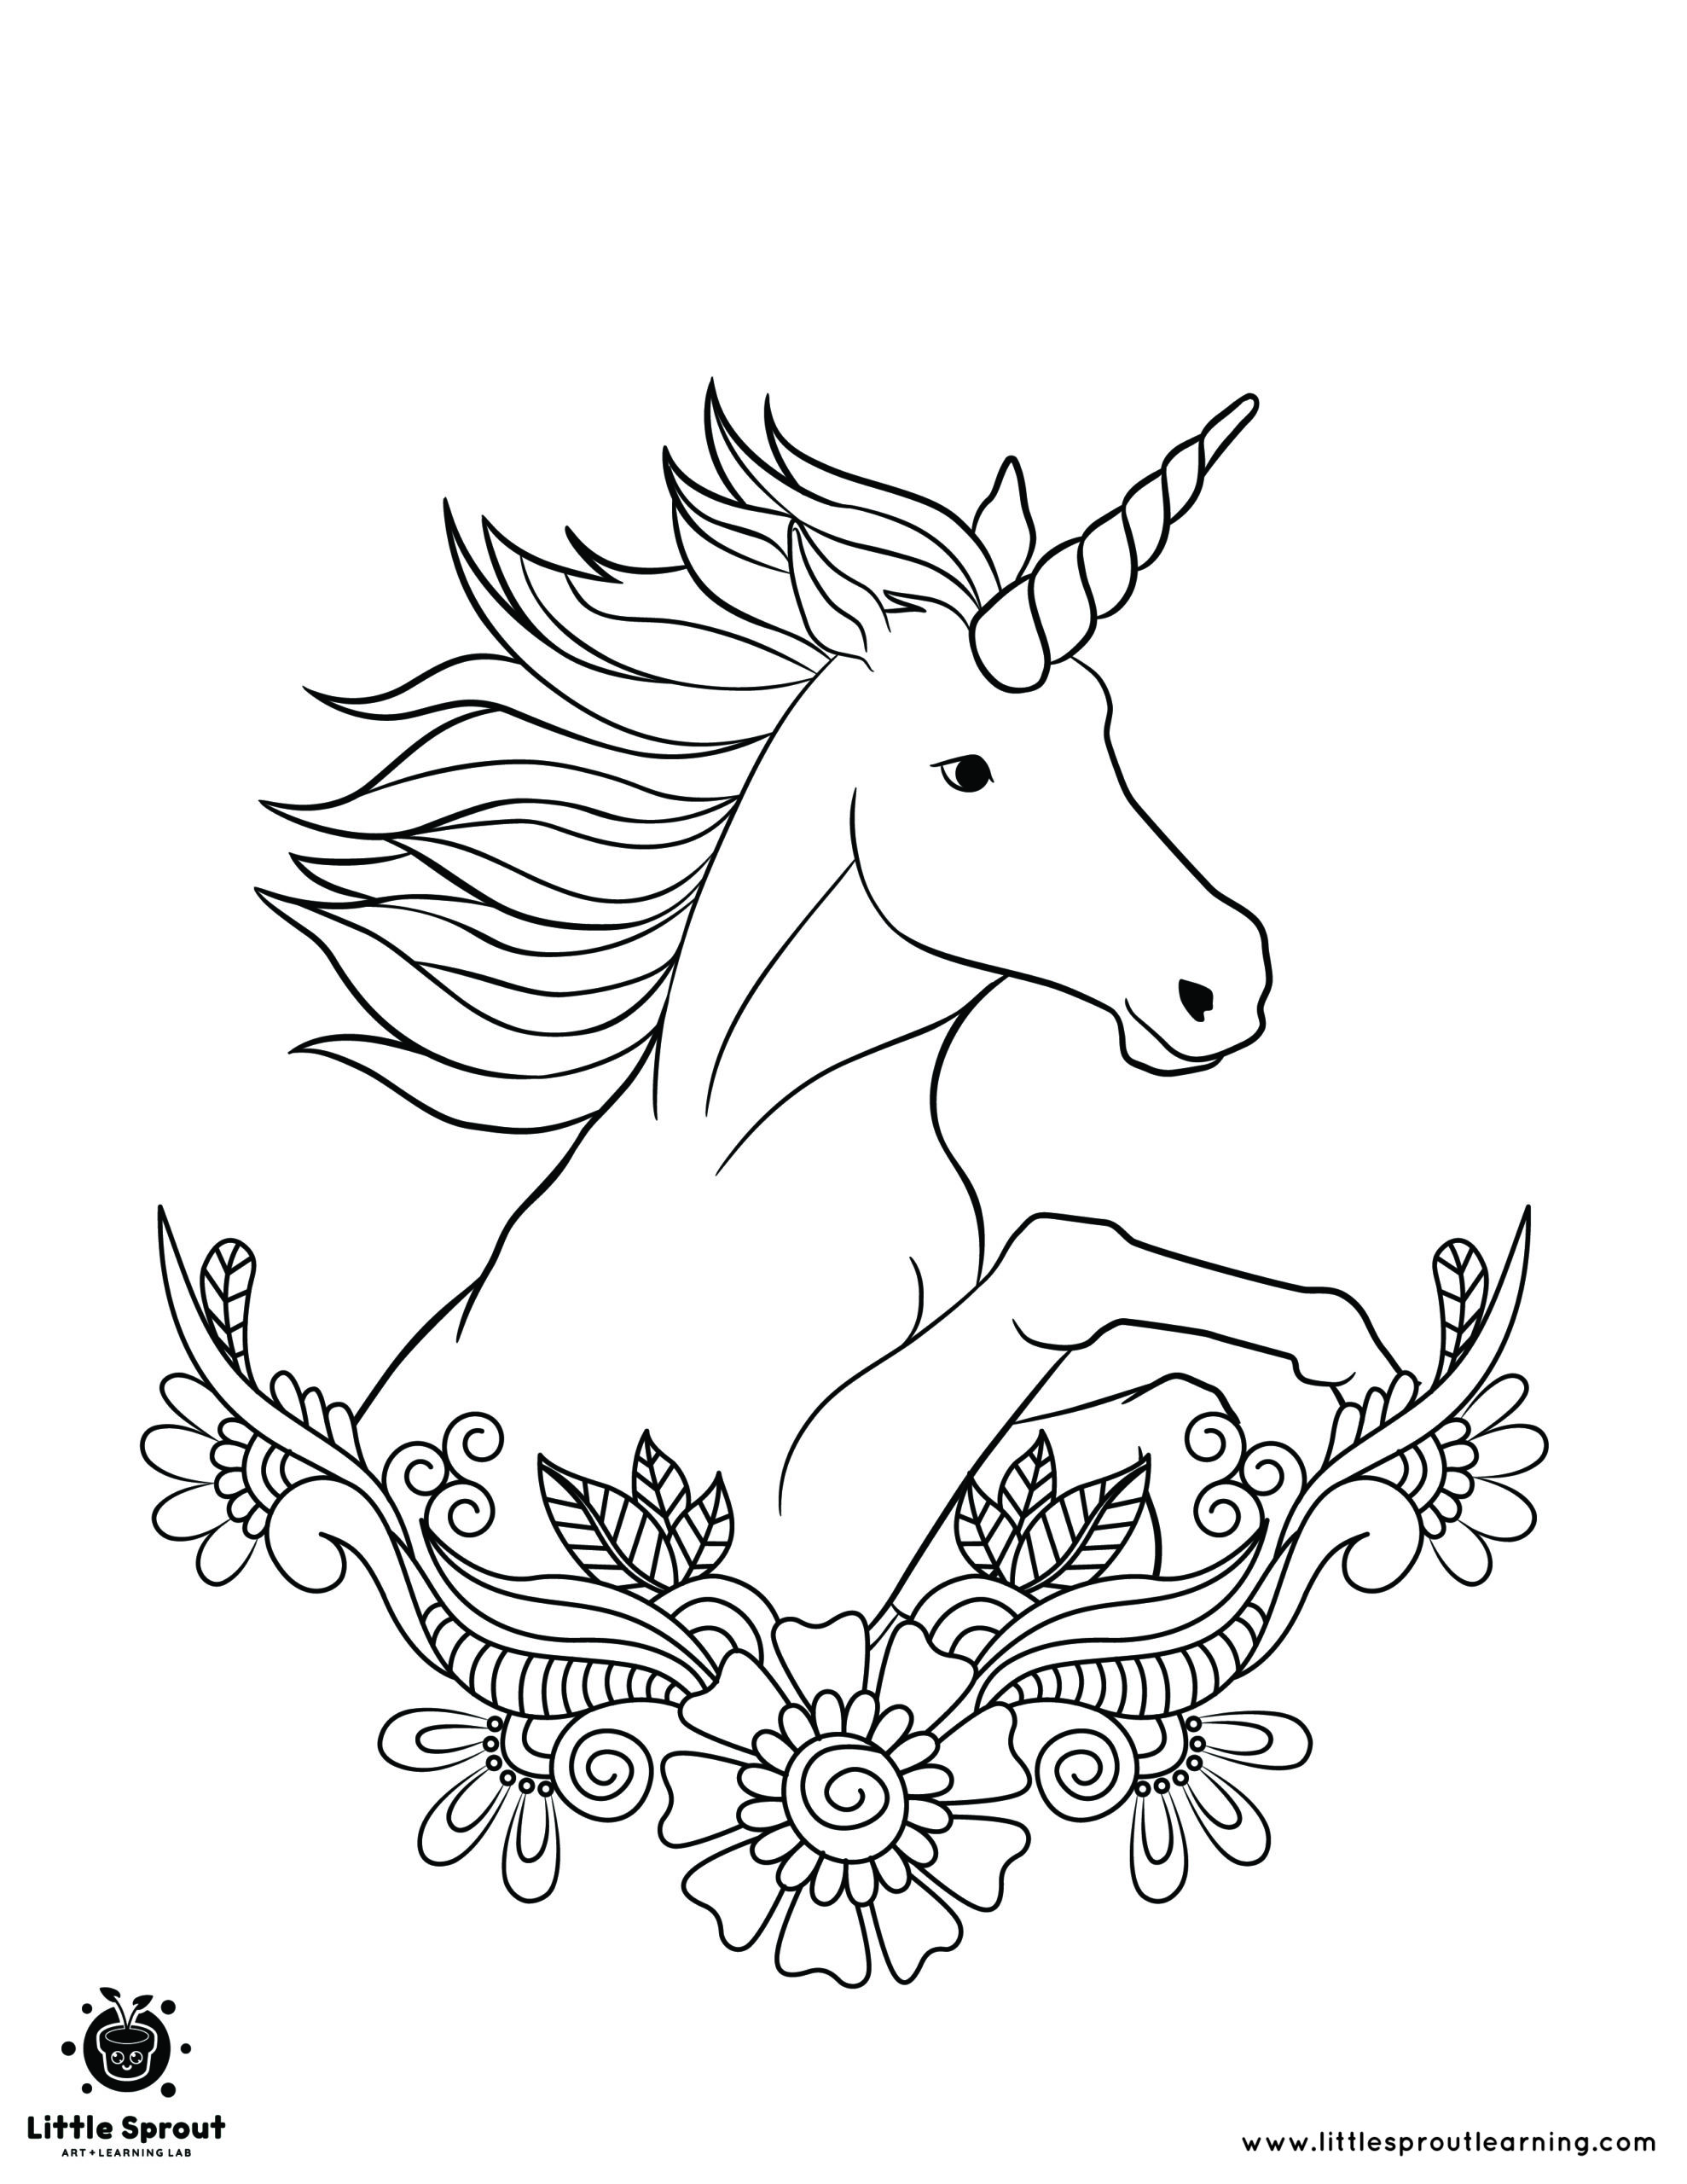 Flowers and Unicorn Coloring Page